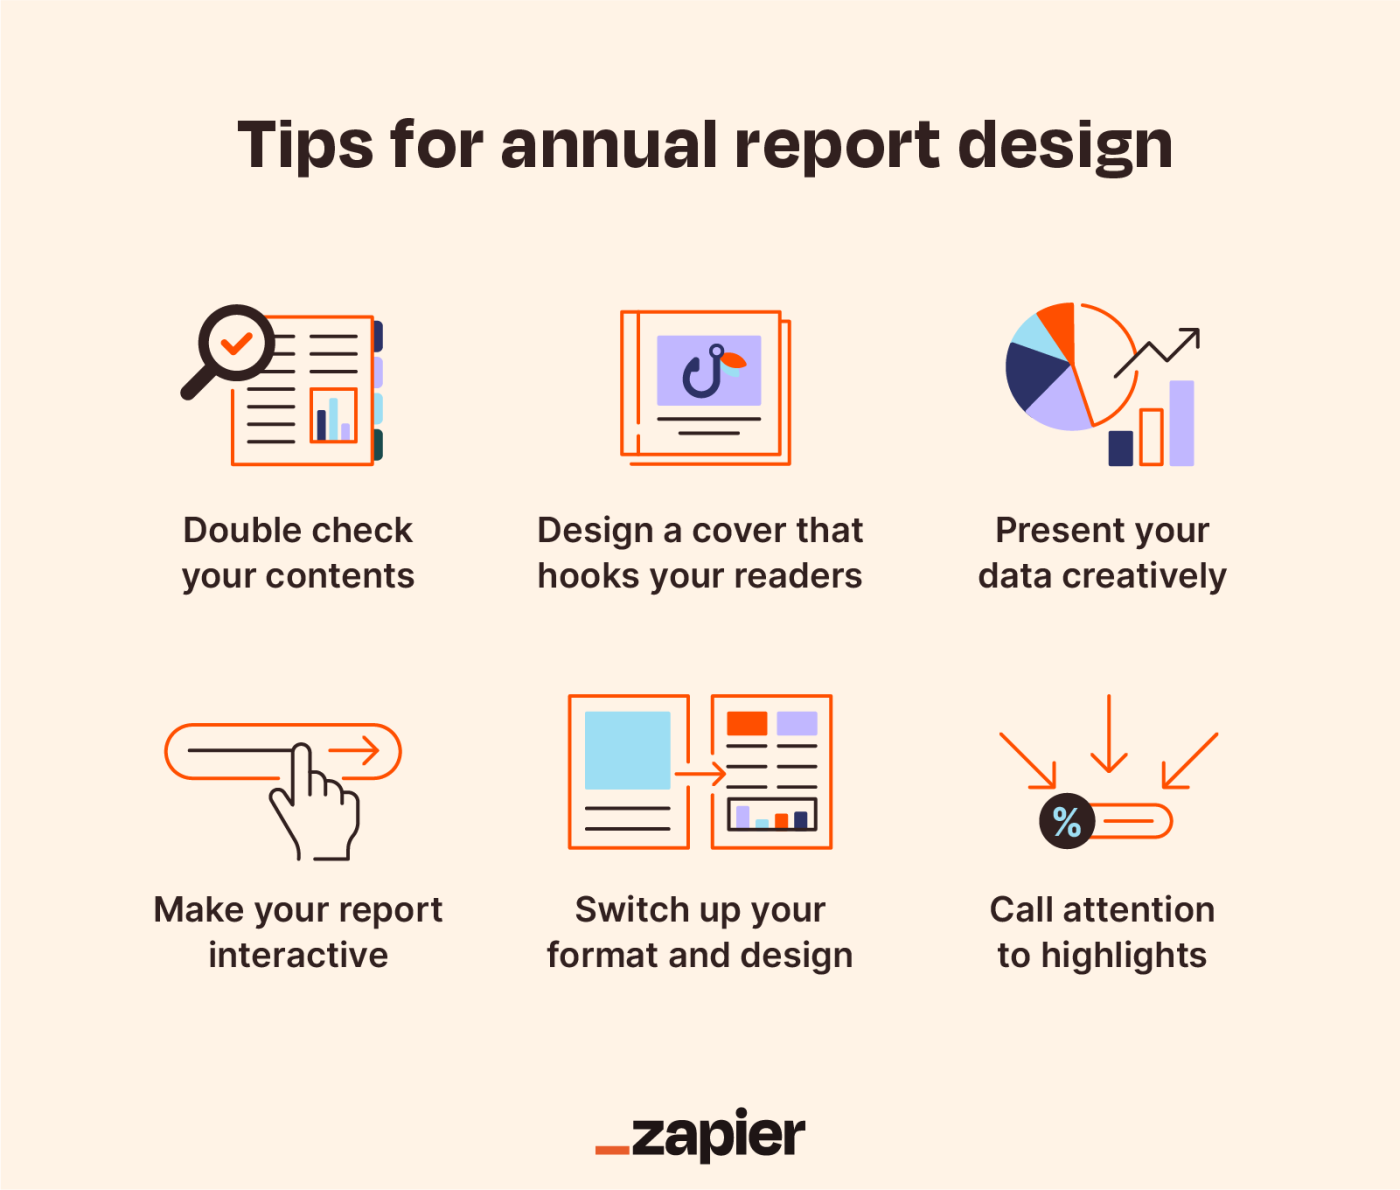  Six illustrated tips for annual report design to help users captivate and impress their readers